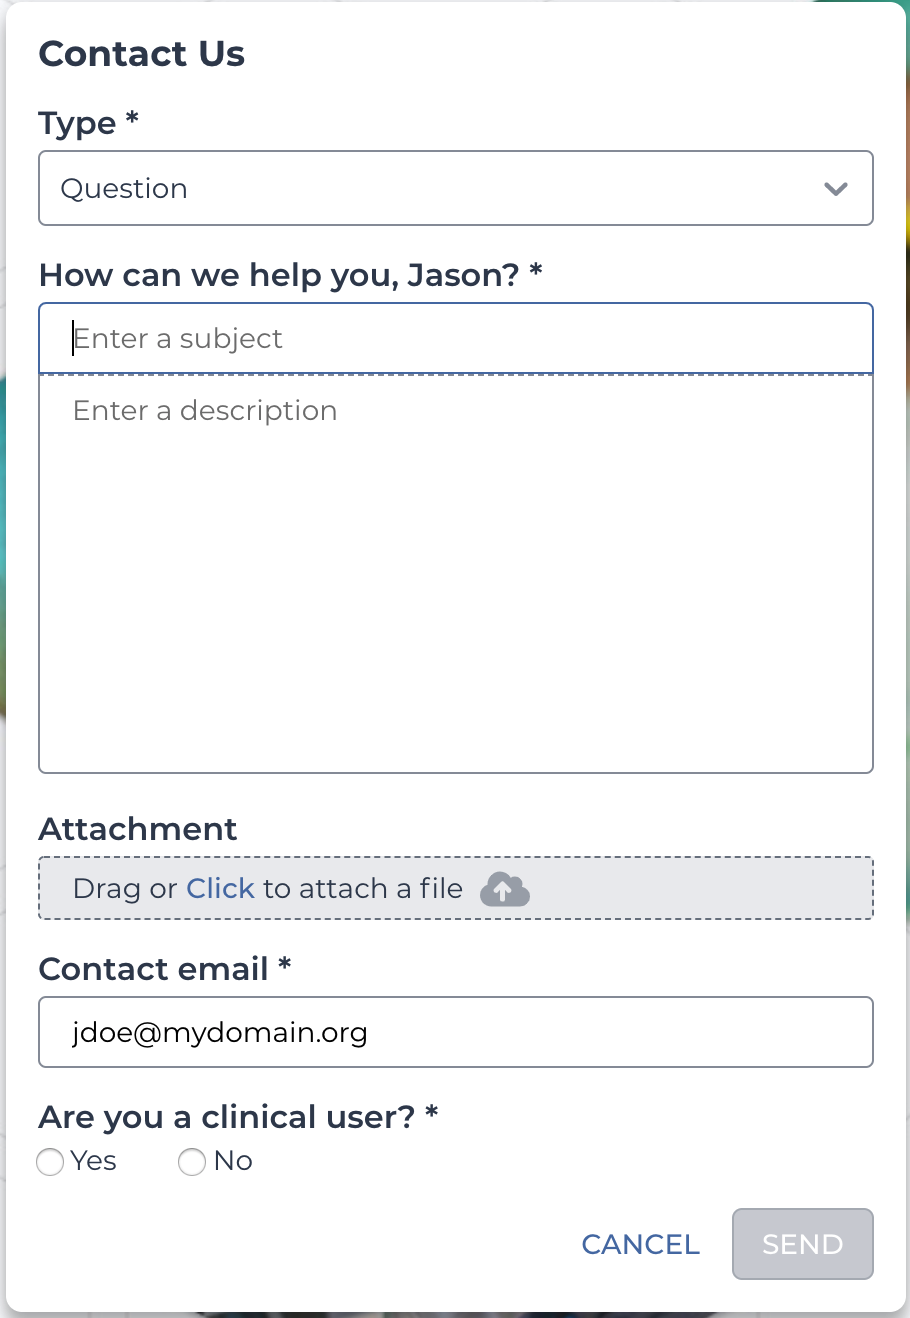 The contact us form, with a dropdown for the type of questions, fields for the subject and main email content, an option to add an attachment, your contact email, and whether you are a clinical user.